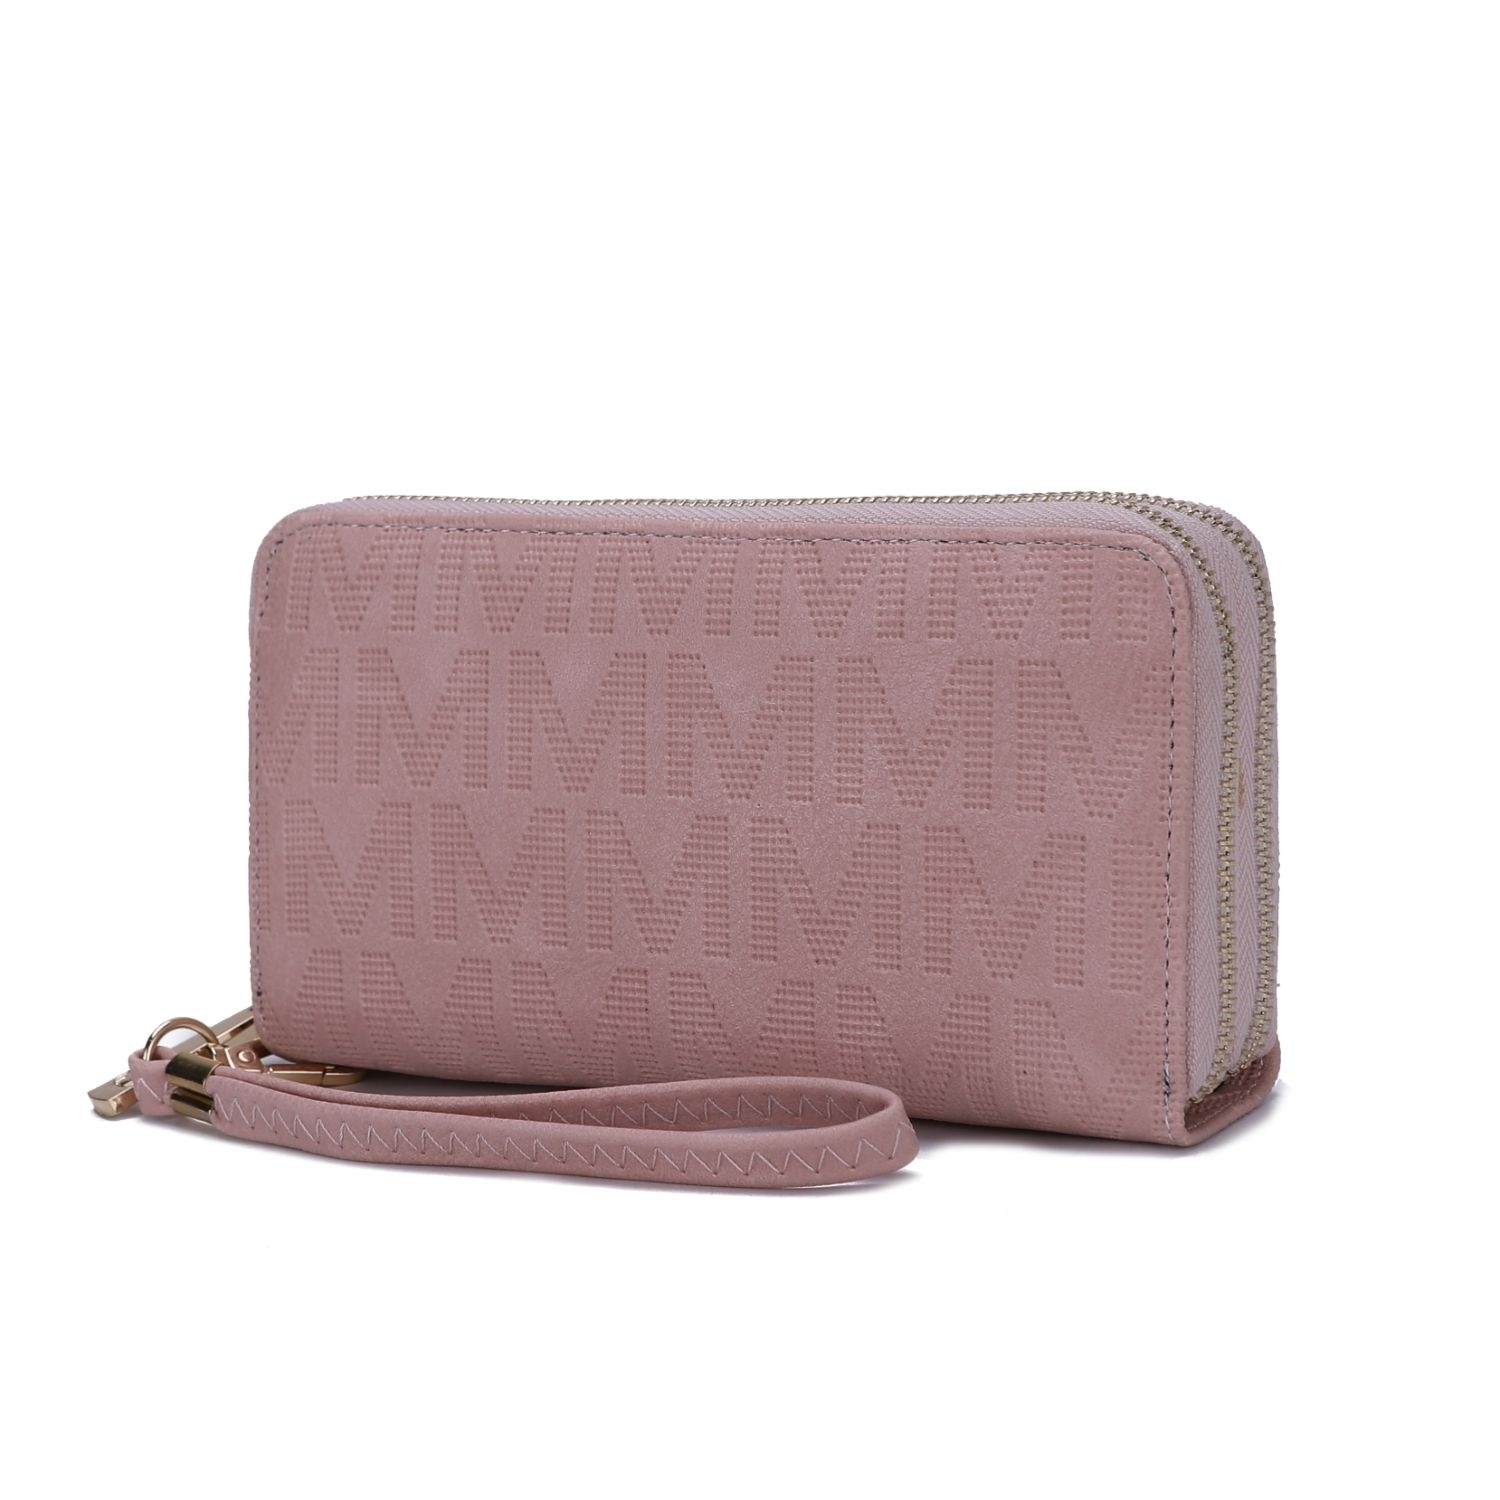 MKF Collection Lisbette Embossed M Signature Wallet By Mia K. Handbag - Rose Pink